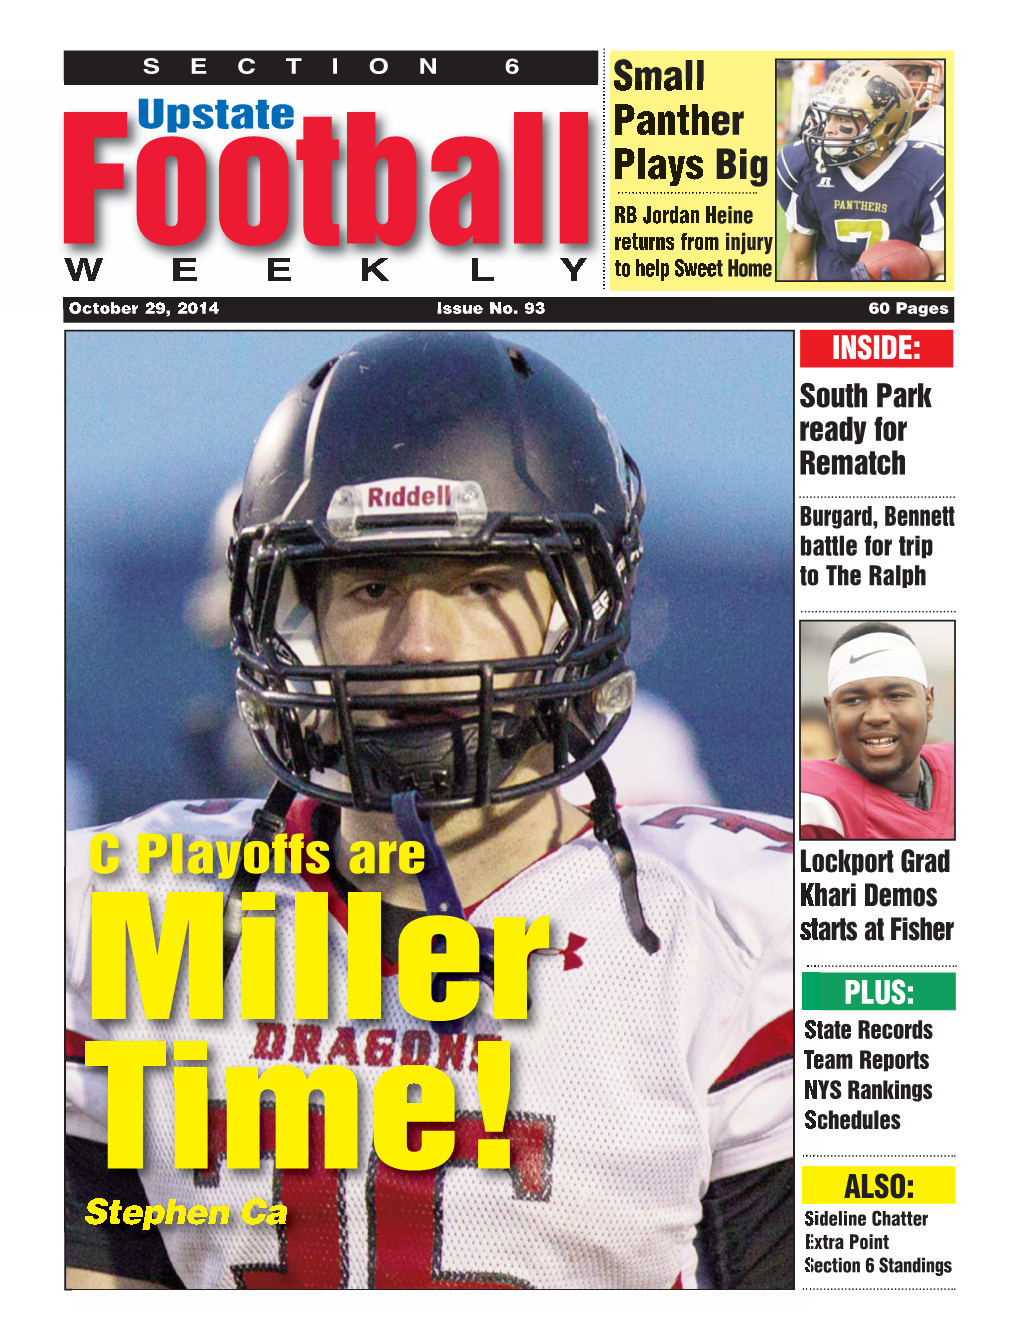 Football Returns from Injury W E E K L Y to Help Sweet Home October 29, 2014 Issue No